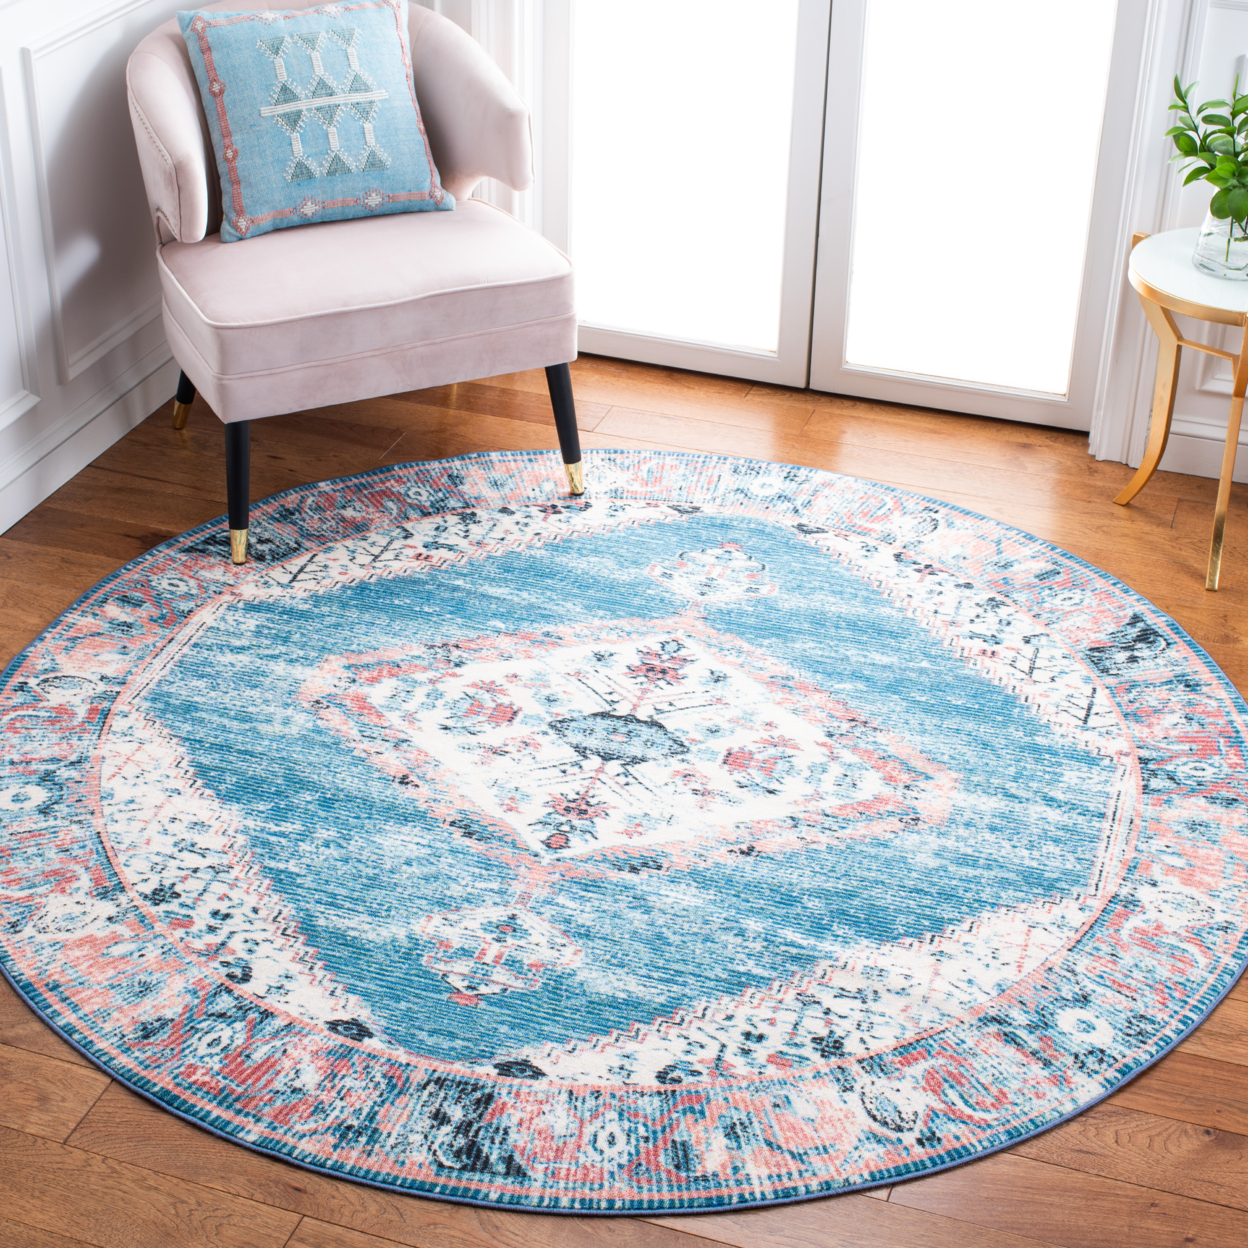 SAFAVIEH Journey Collection JNY149A Ivory / Blue Rug - 6-7 X 6-7 Round